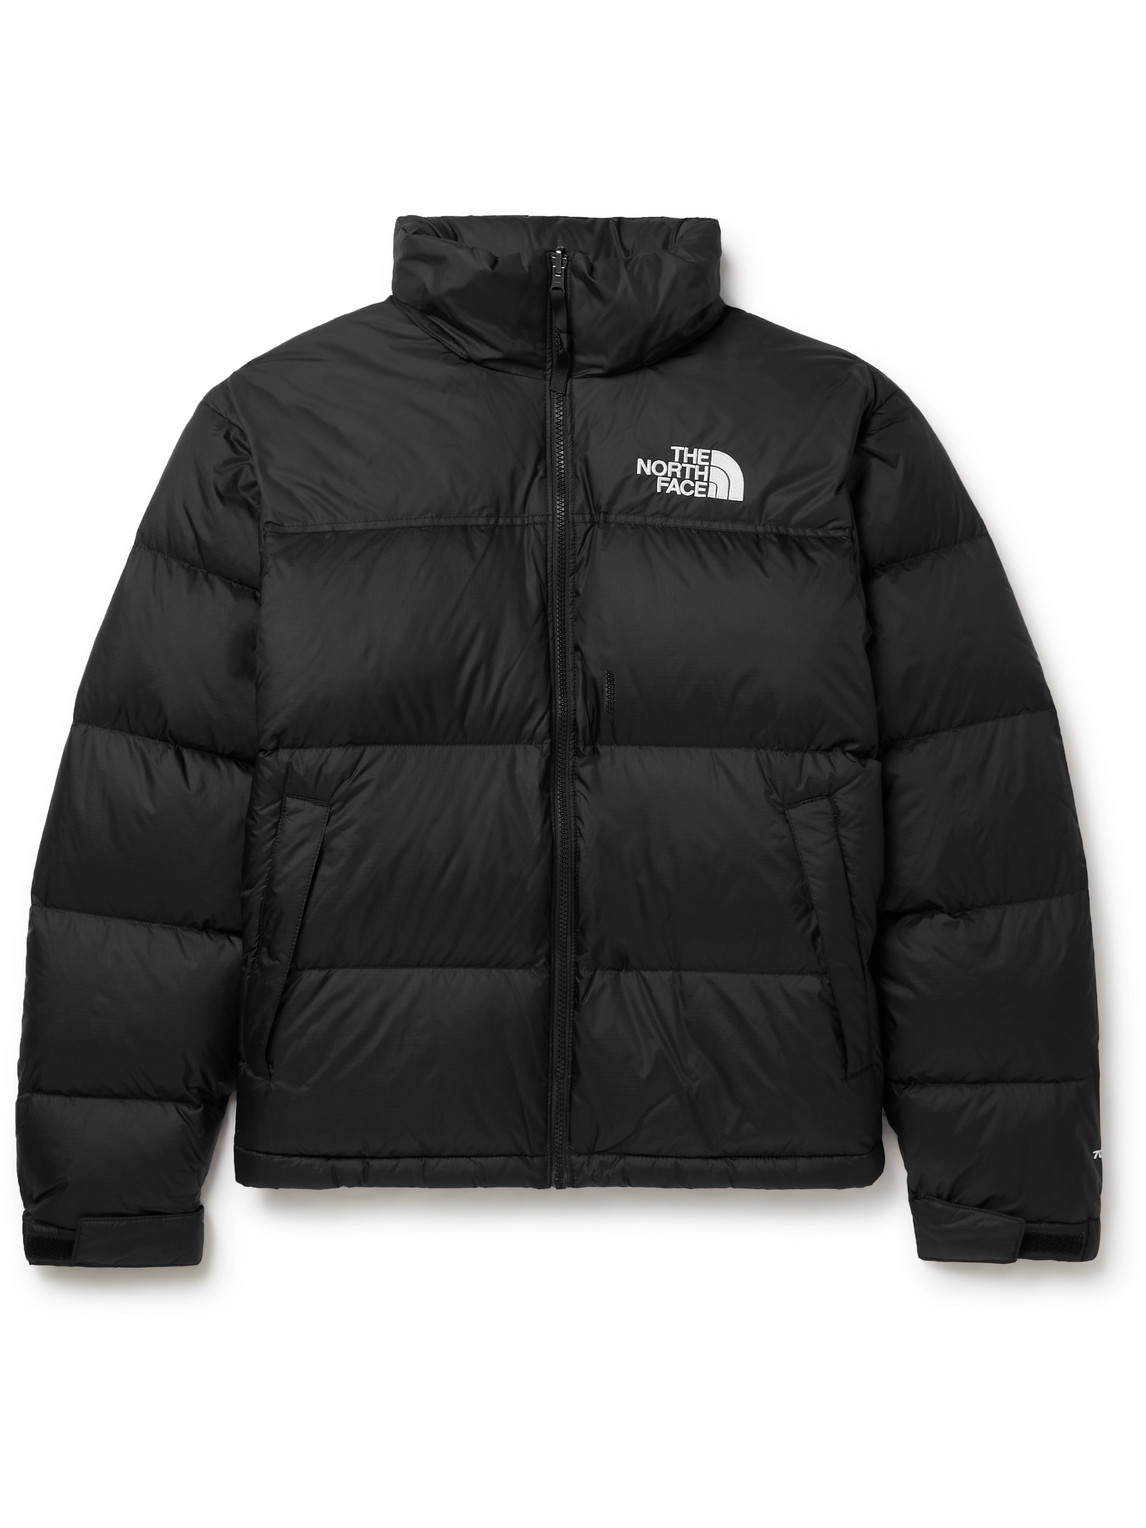 The North Face Two-Tone Hooded Jacket - Green for Men